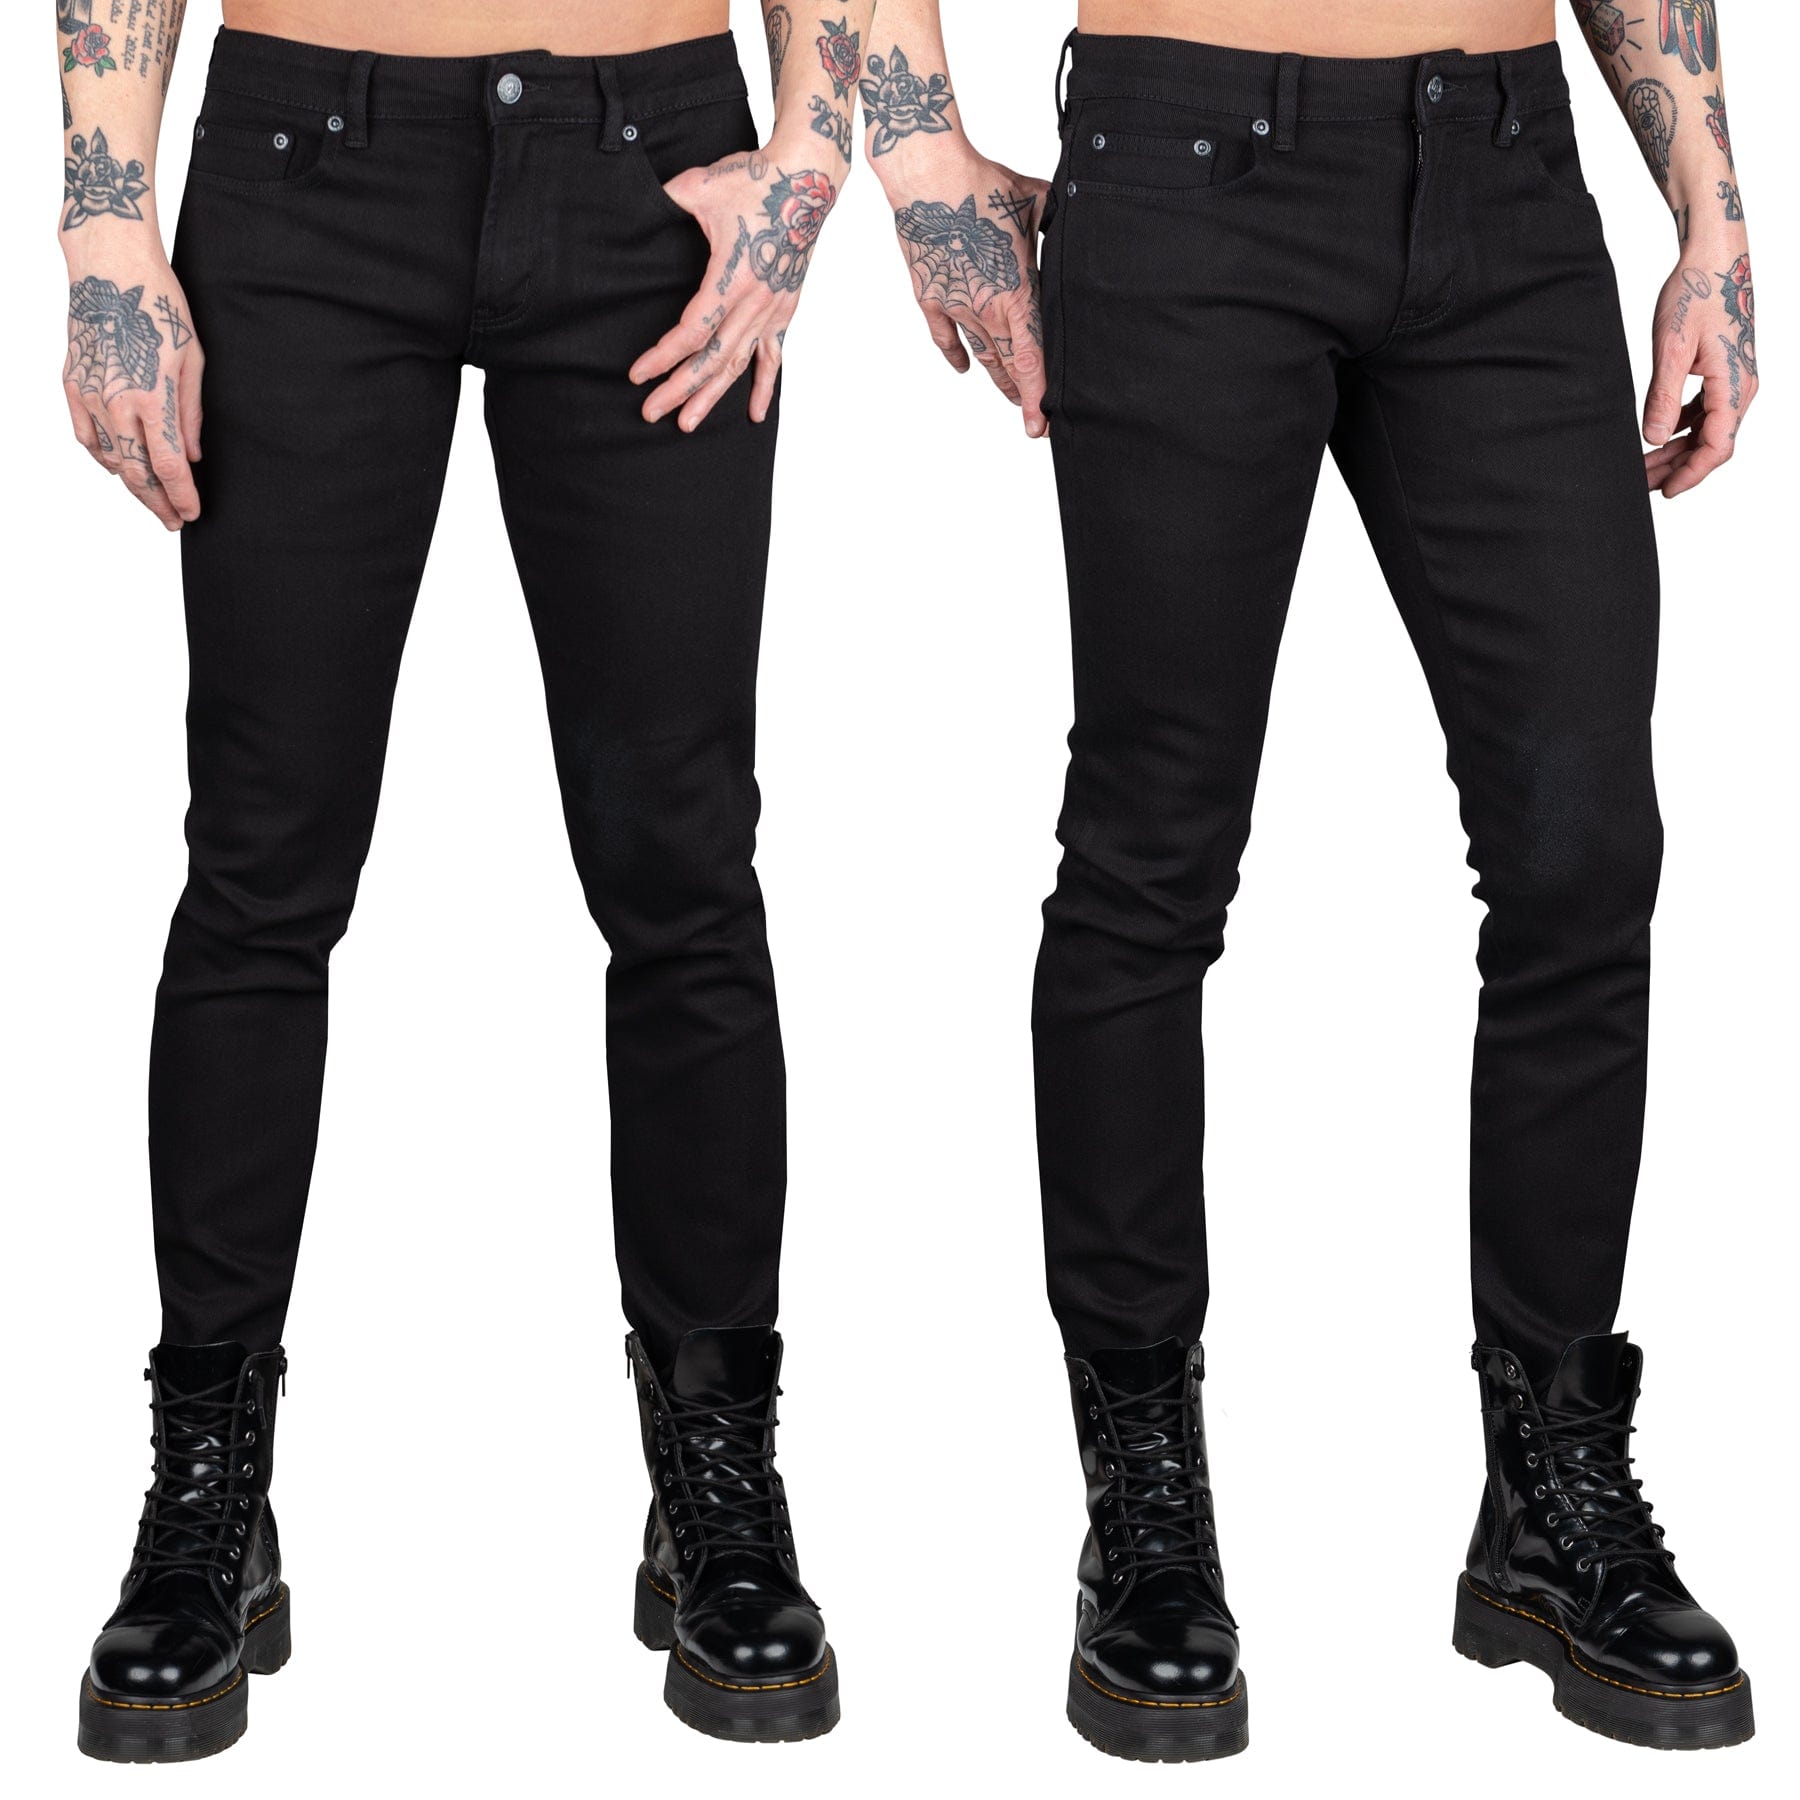 Essentials Collection Pants Rampager Jeans - Black